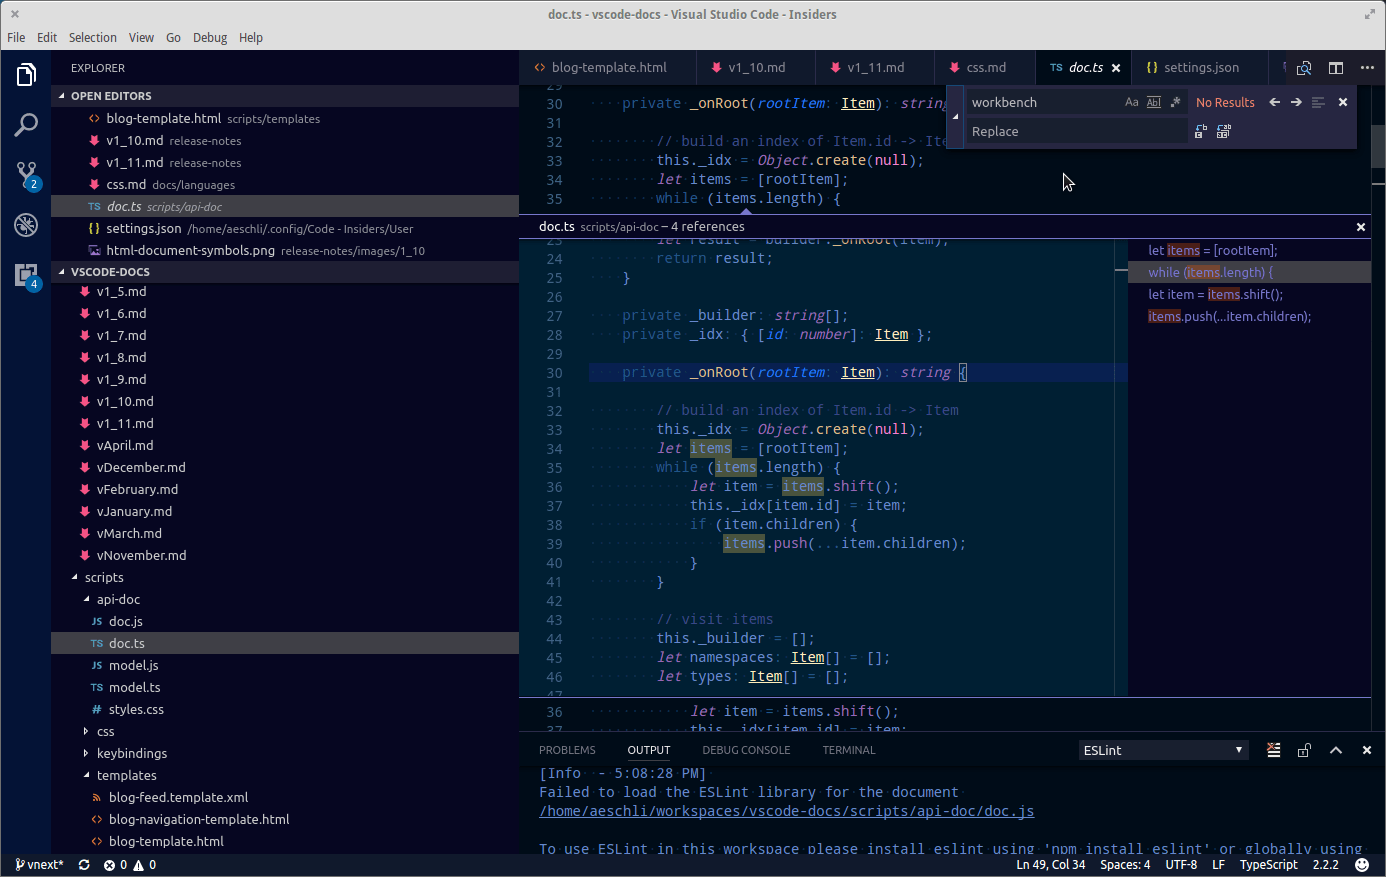 Abyss theme with more colors